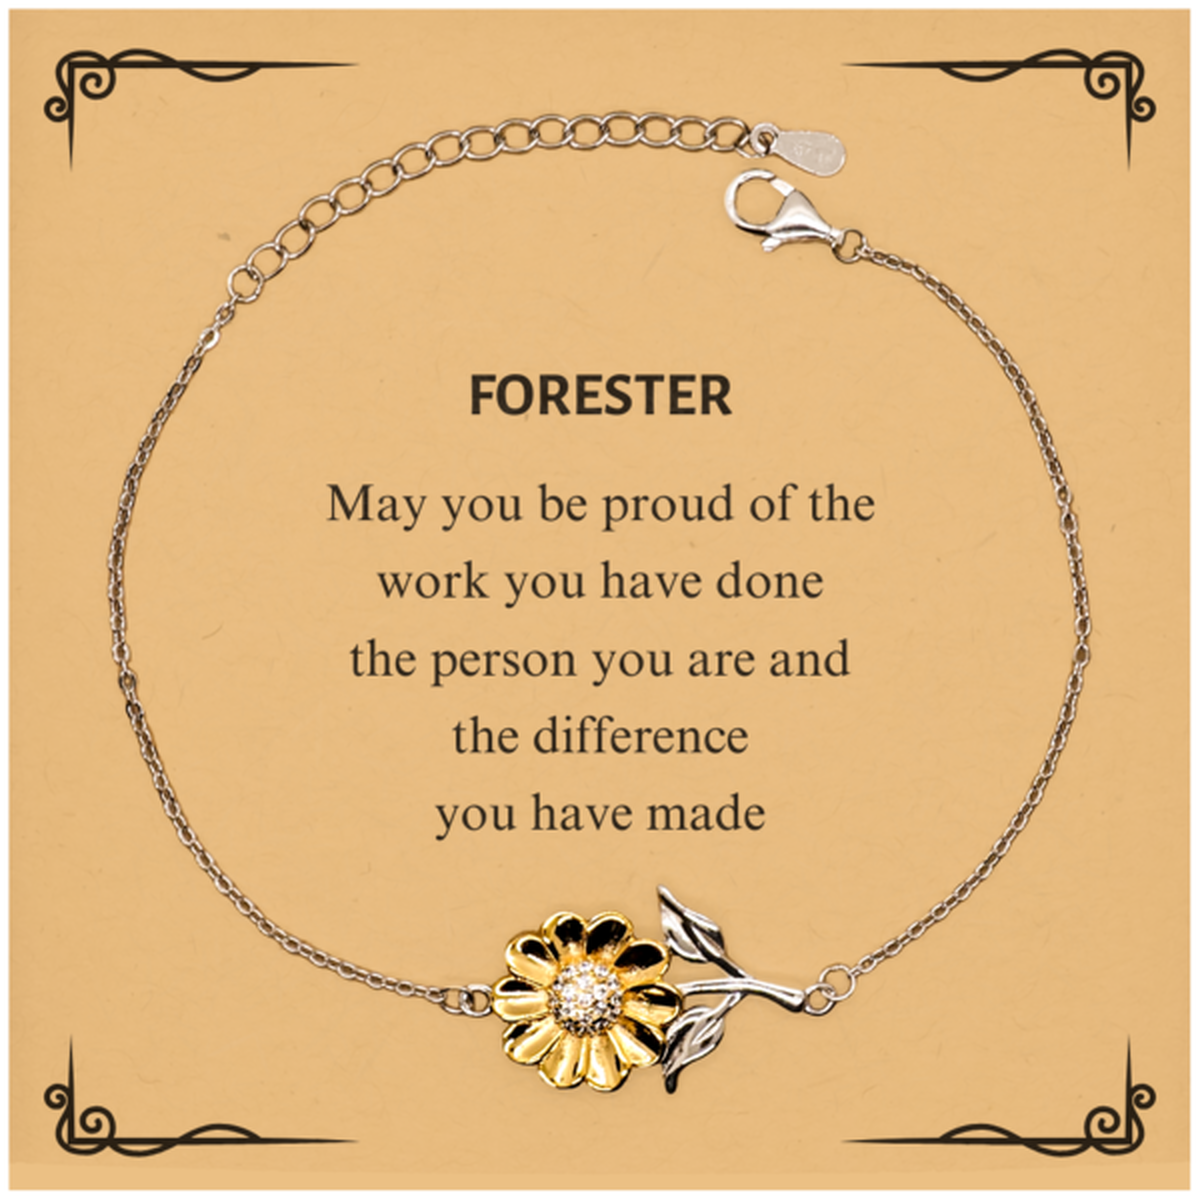 Forester May you be proud of the work you have done, Retirement Forester Sunflower Bracelet for Colleague Appreciation Gifts Amazing for Forester